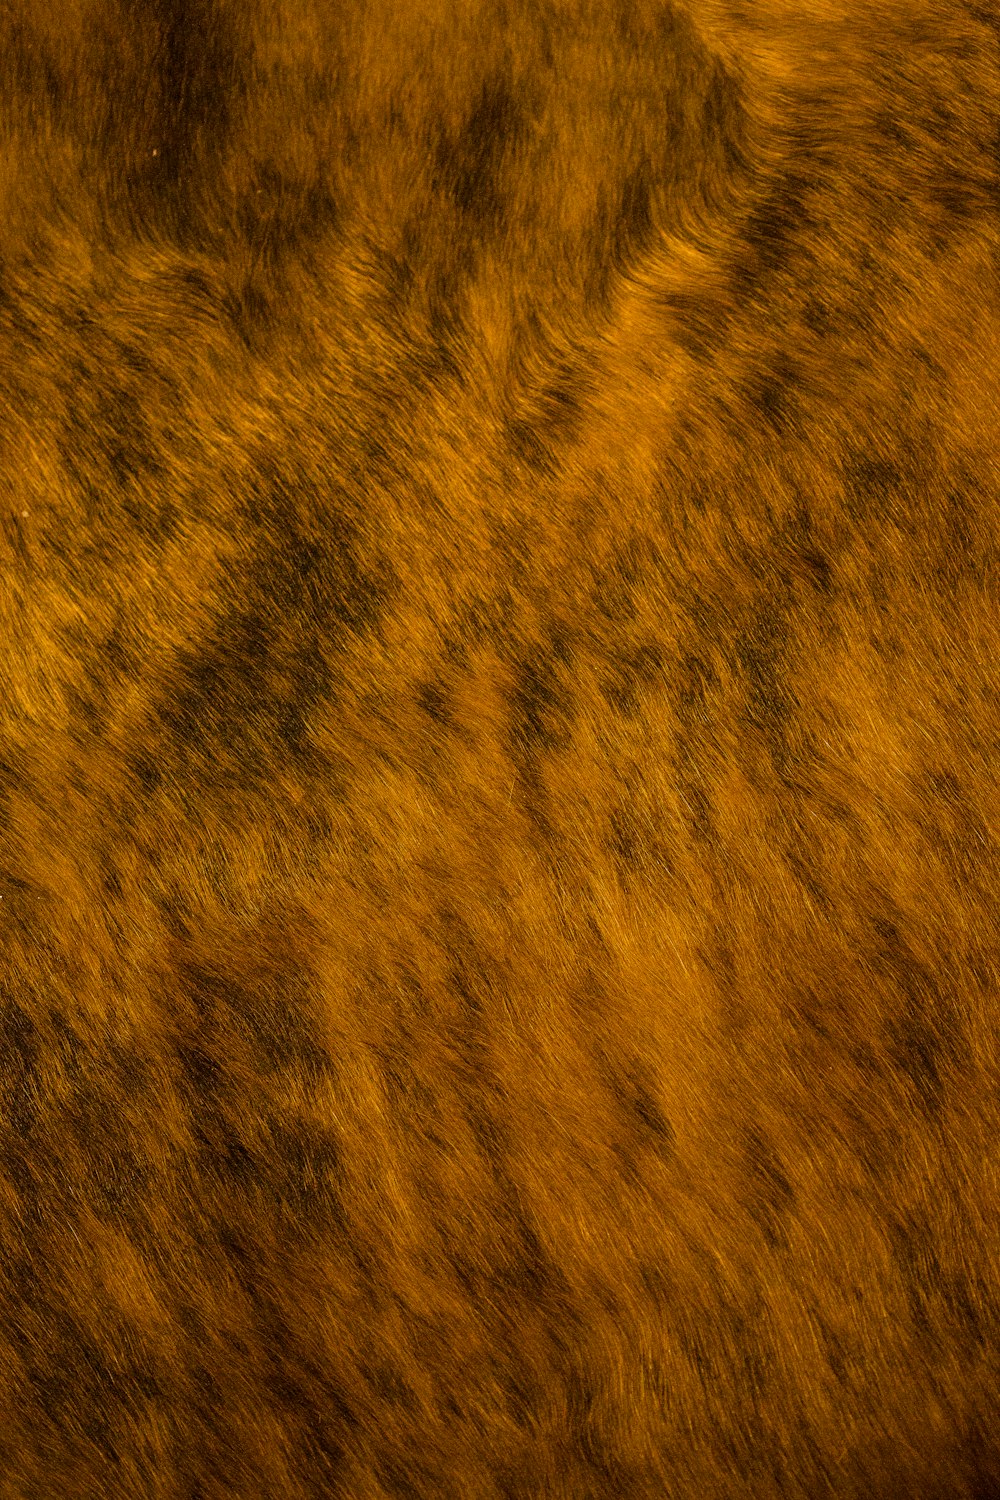 a close up of a brown animal's fur